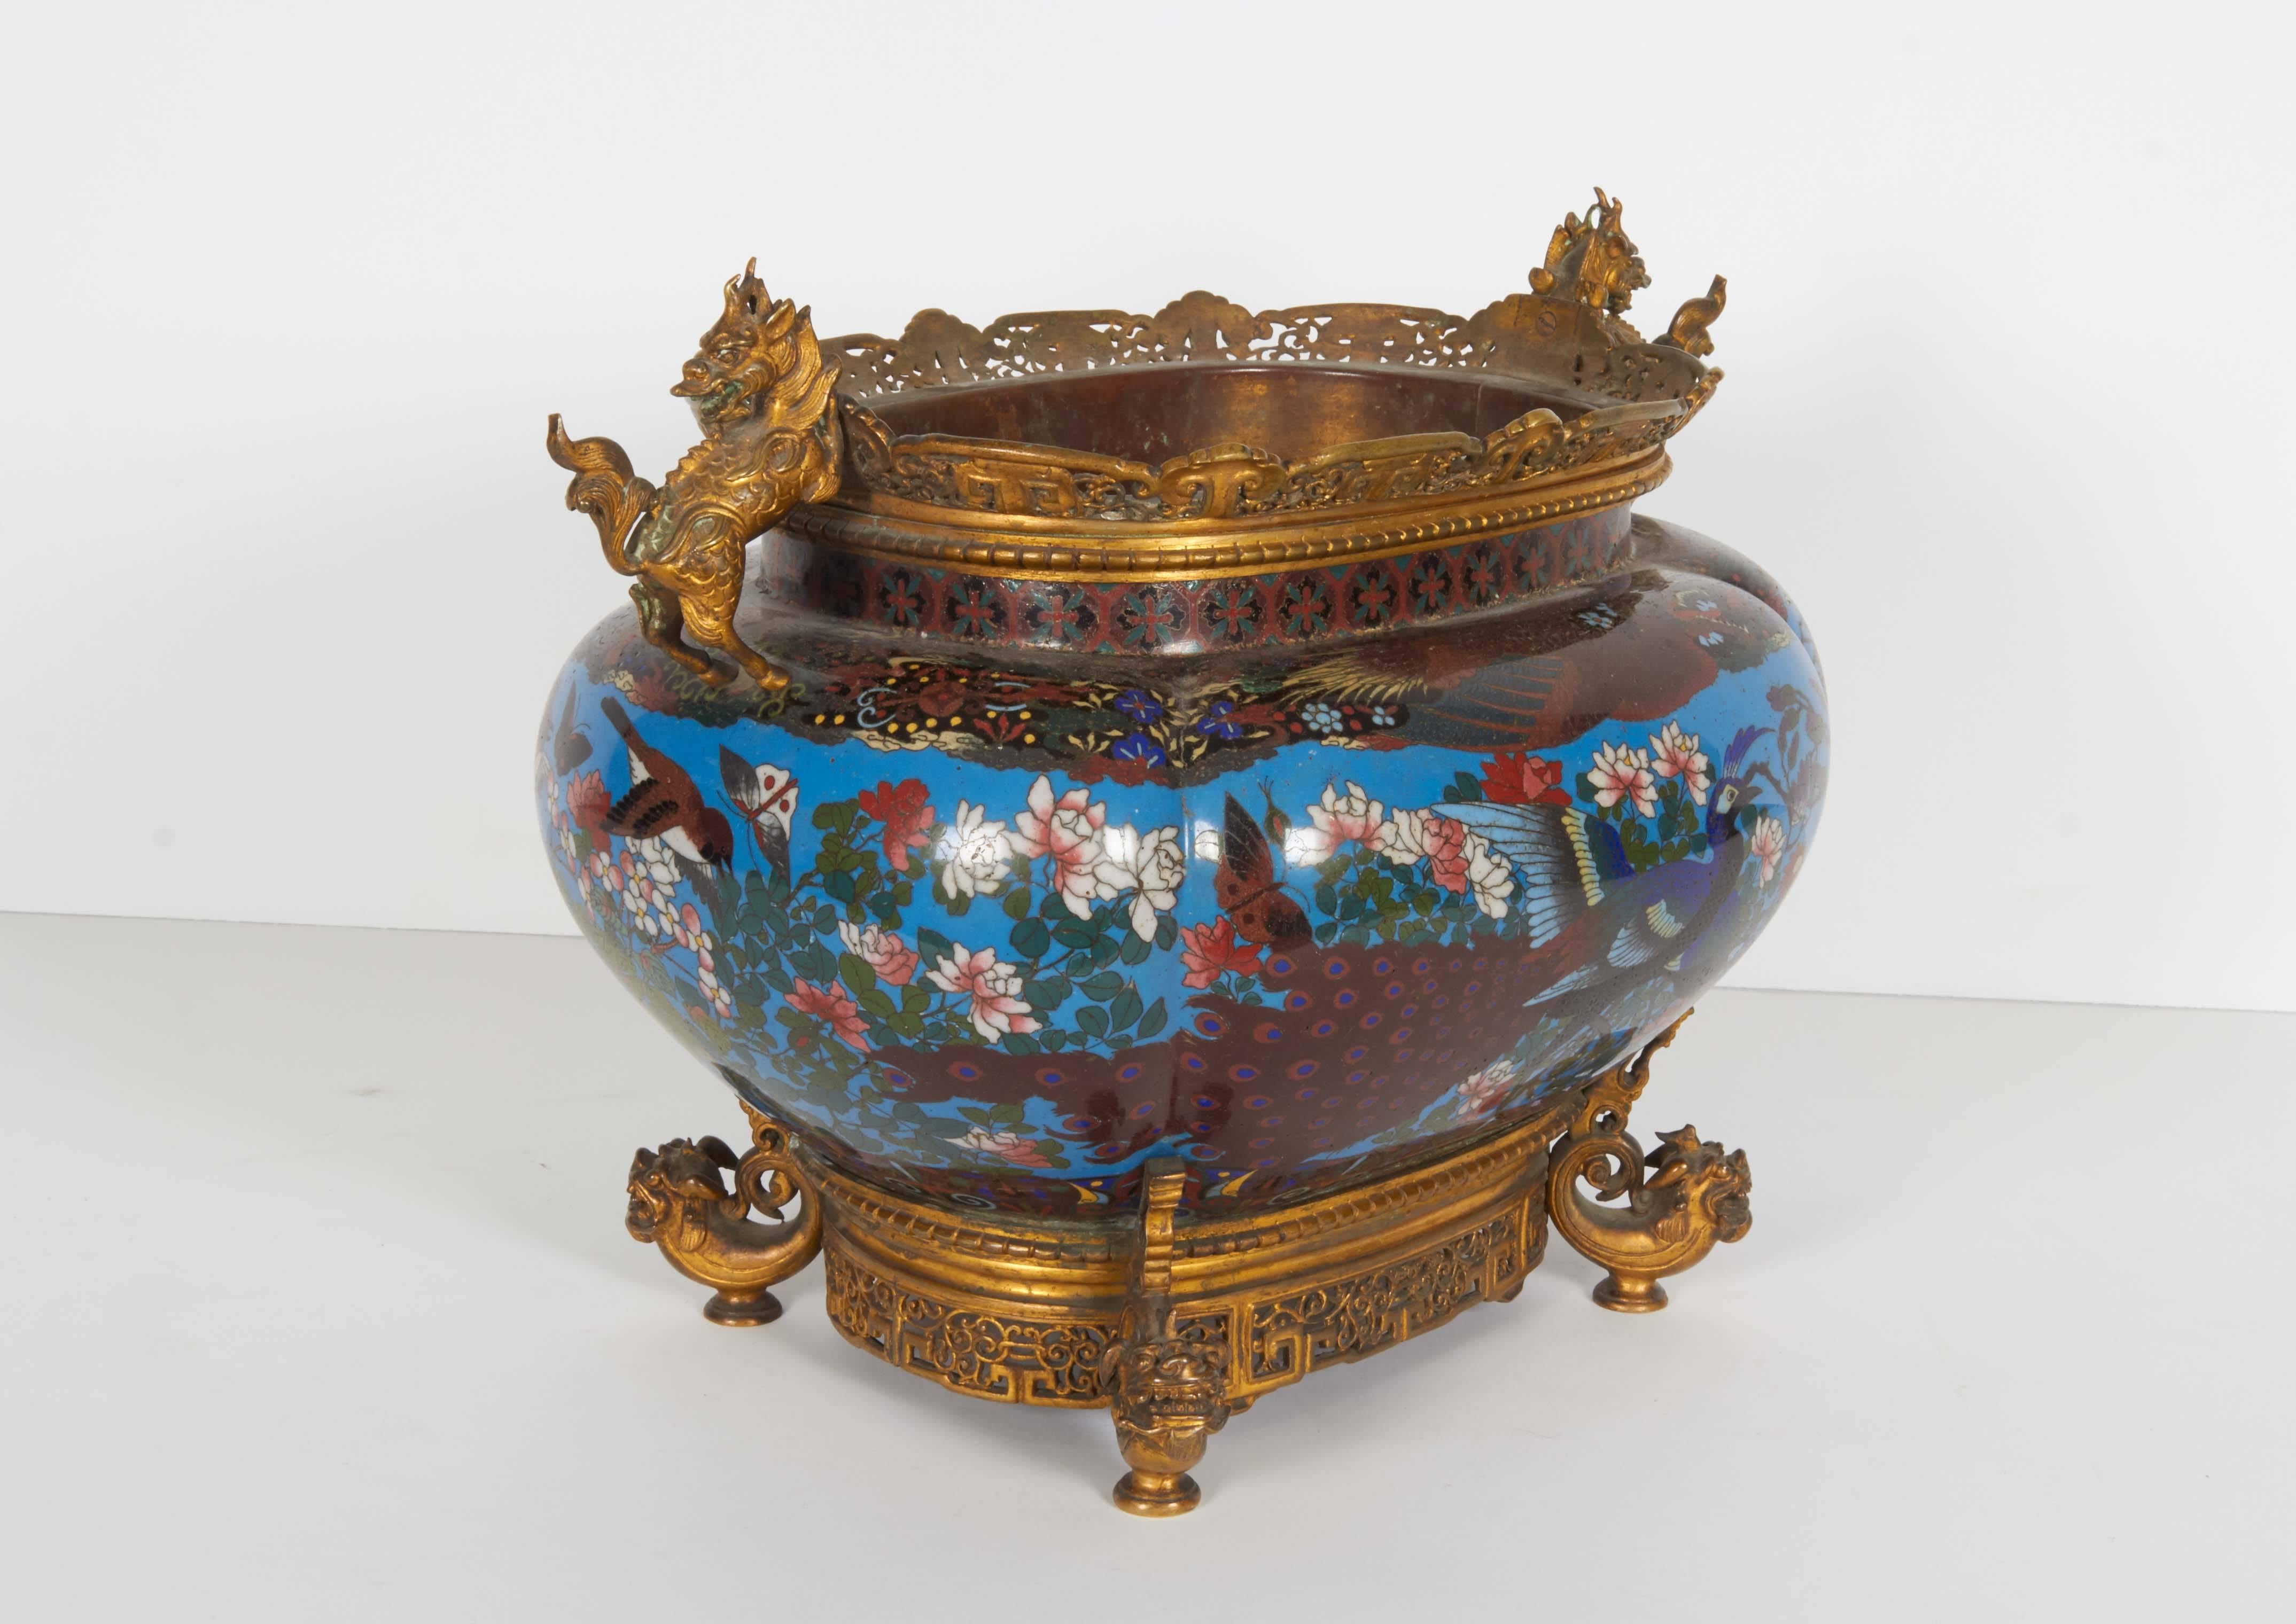 A French Japonisme ormolu-mounted three-piece Japanese cloisonné enamel garniture.

The bronze mounts are attributed to Ferdinand Barbedienne.

Comprising of a pair of vases and a centerpiece / jardiniere. 

Very finely painted.

Vases: 14